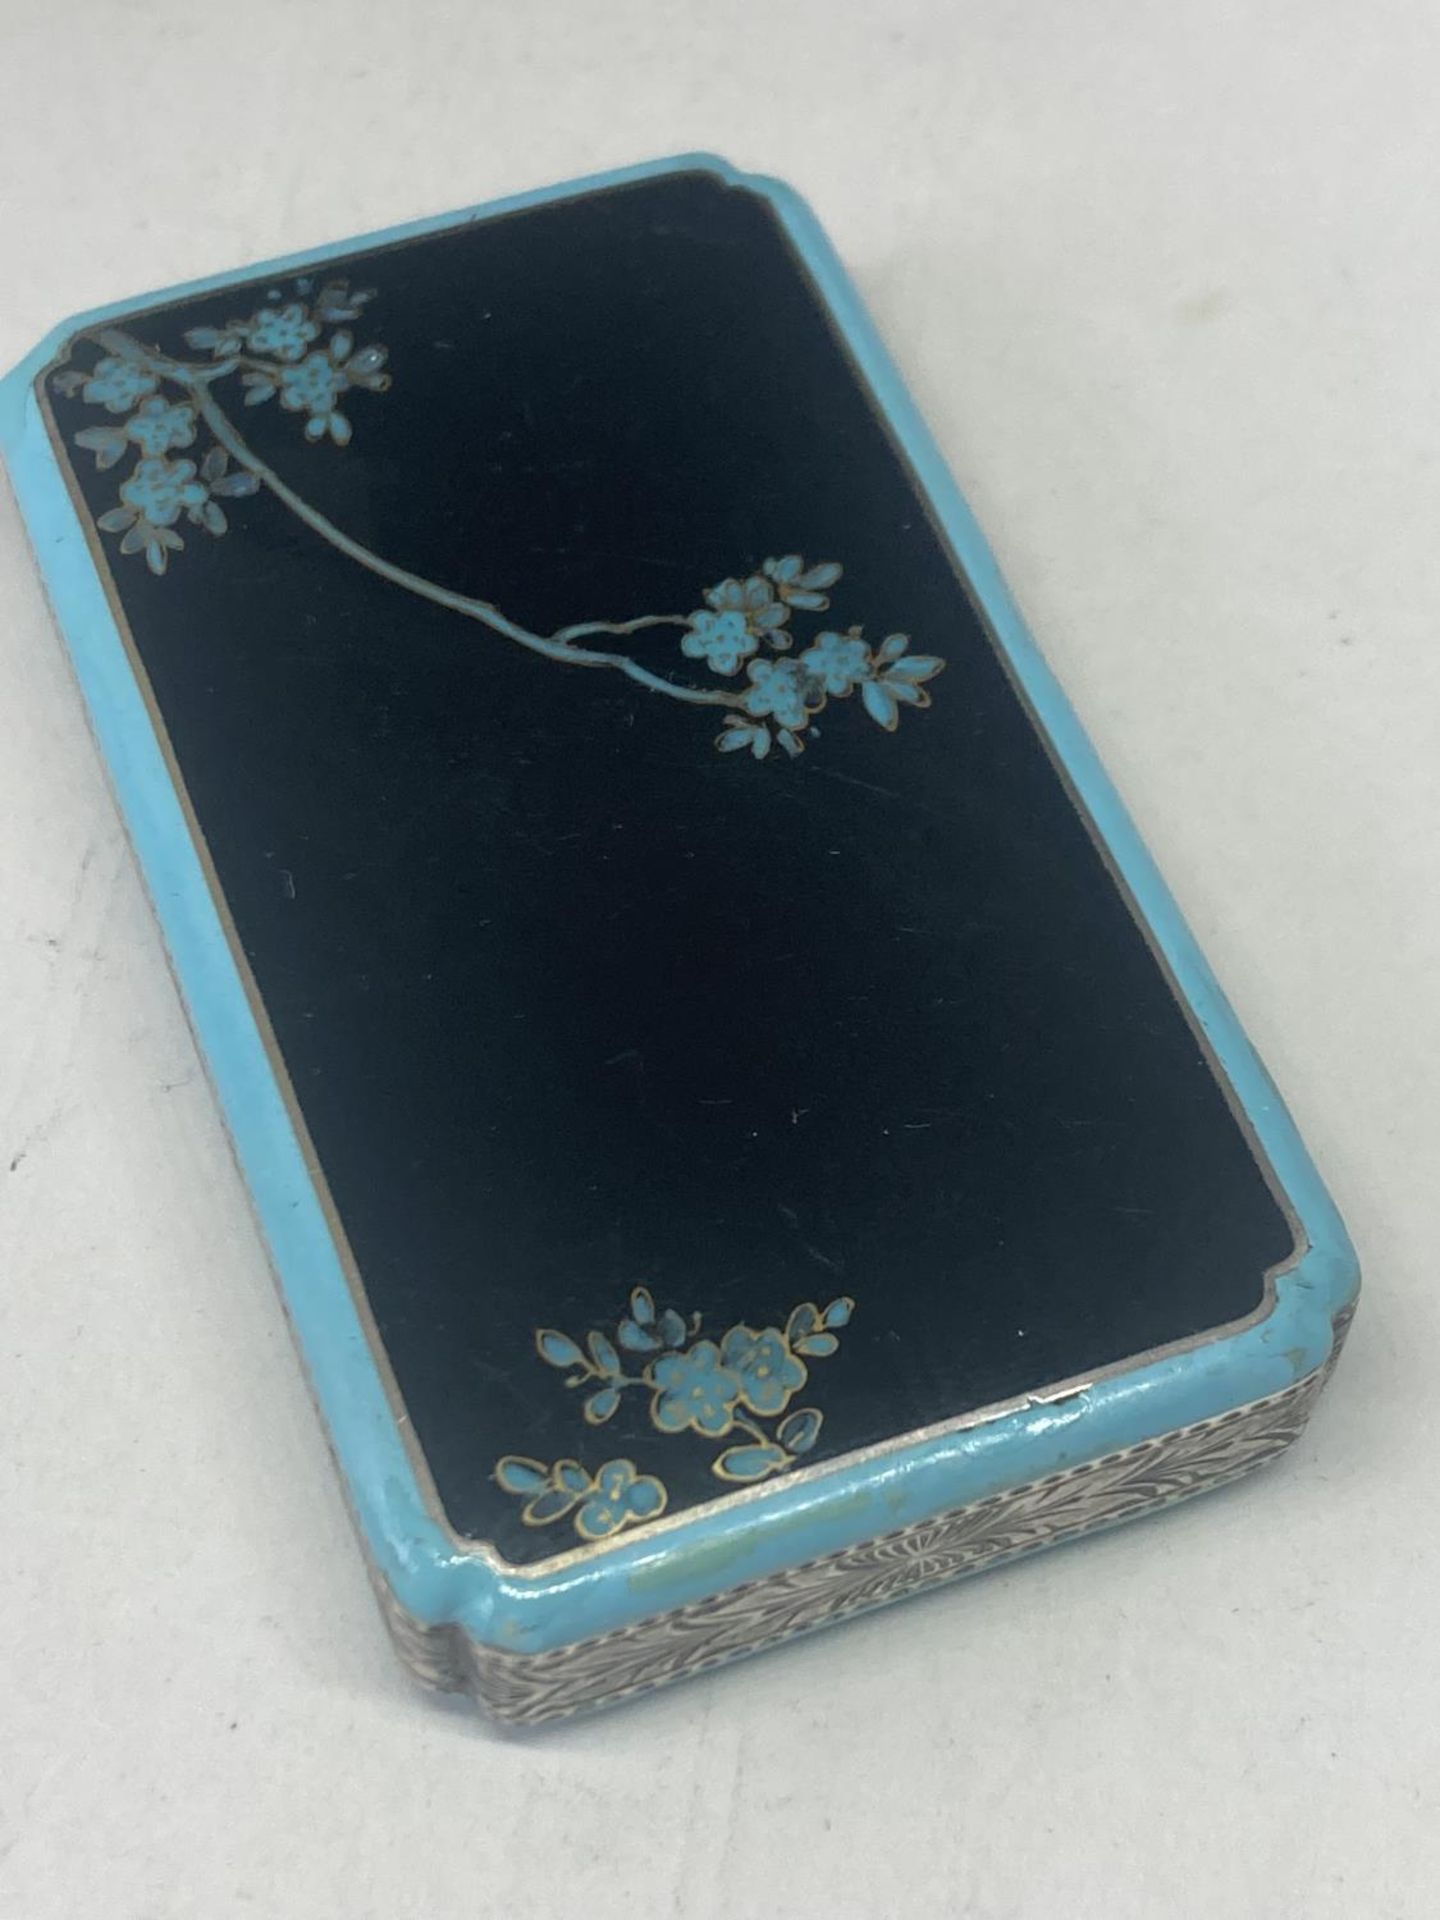 A SILVER AND ENAMEL TRINKET BOX WITH A TURQUOISE BLUE AND BLACK ORIENTAL BIRD DECORATION - Image 4 of 8